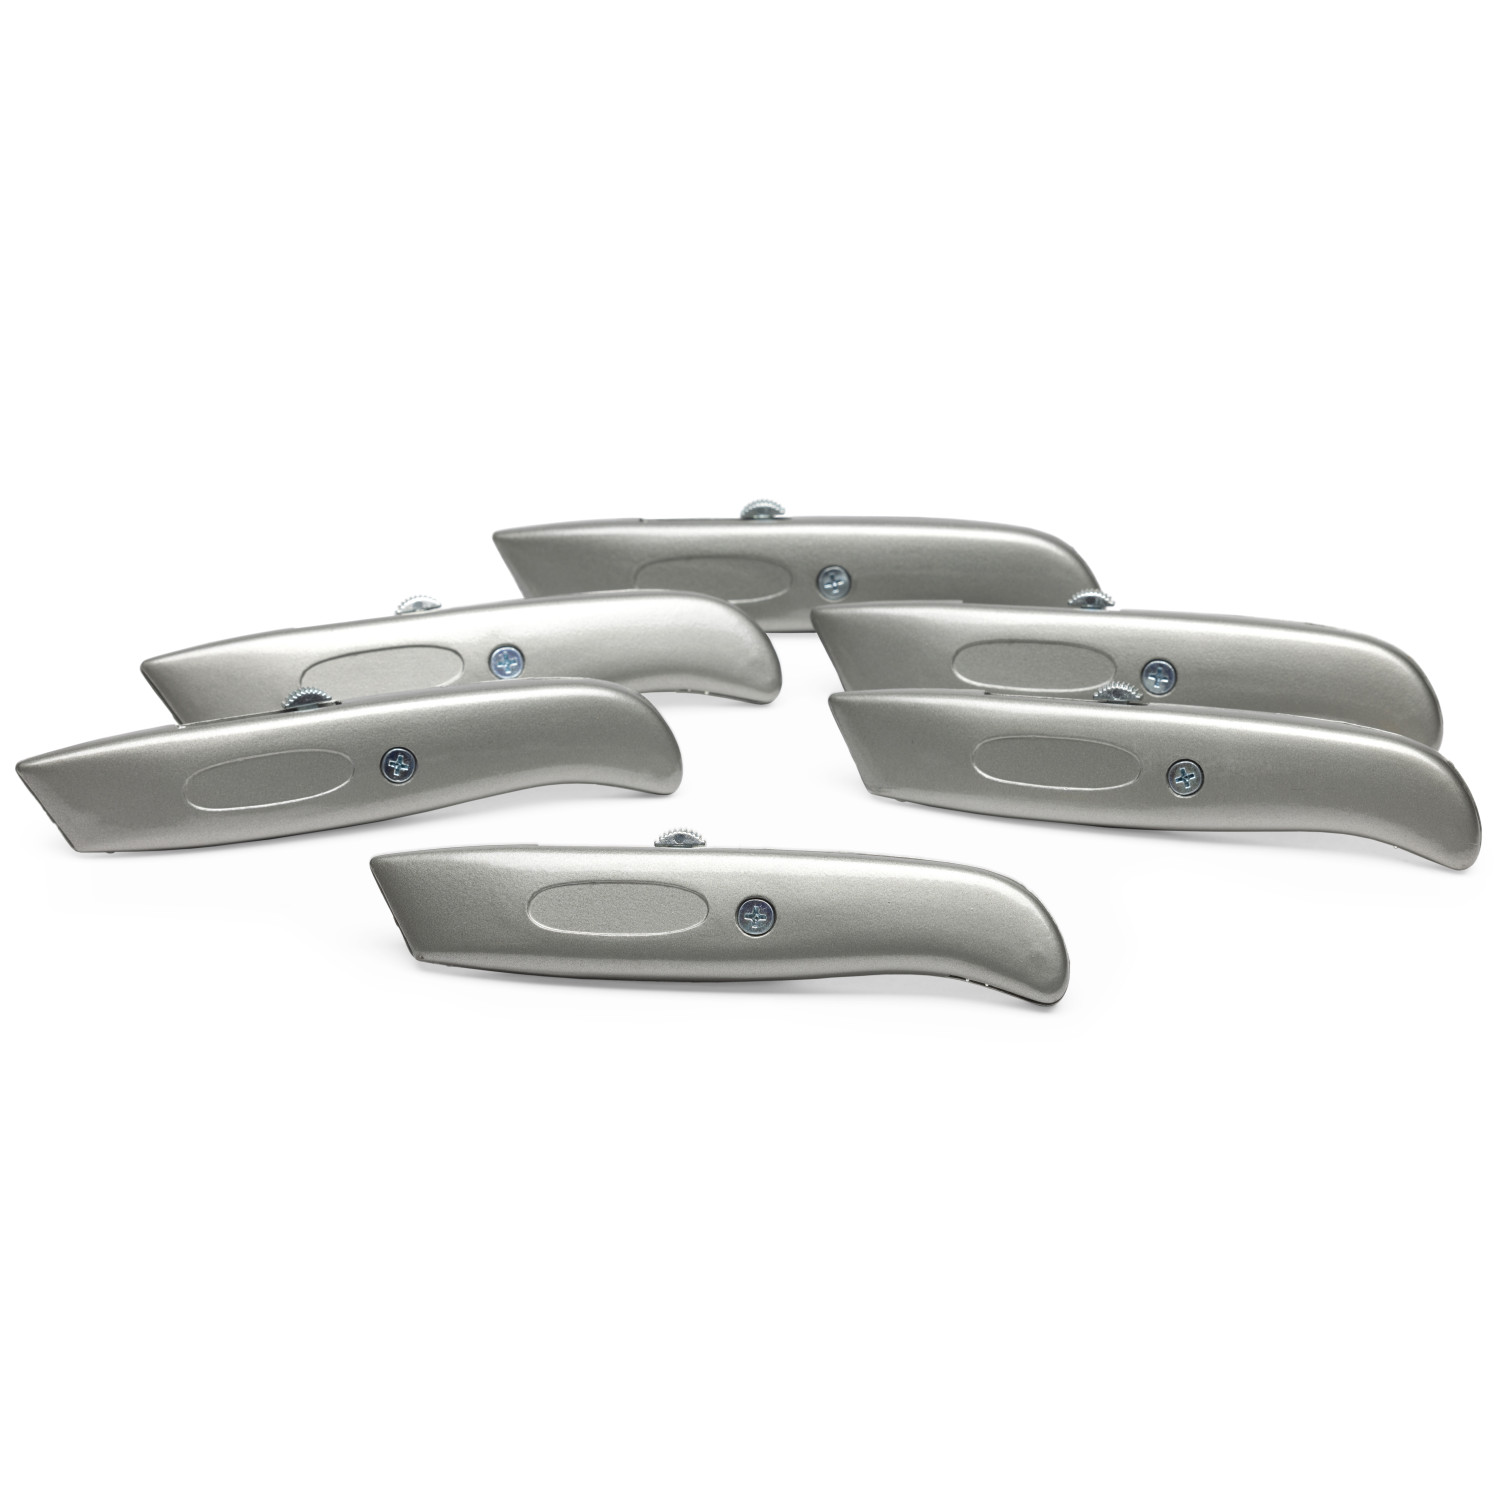 Encore EP-190 Retractable Box Cutter with Scoring Wheel - 12 Pack